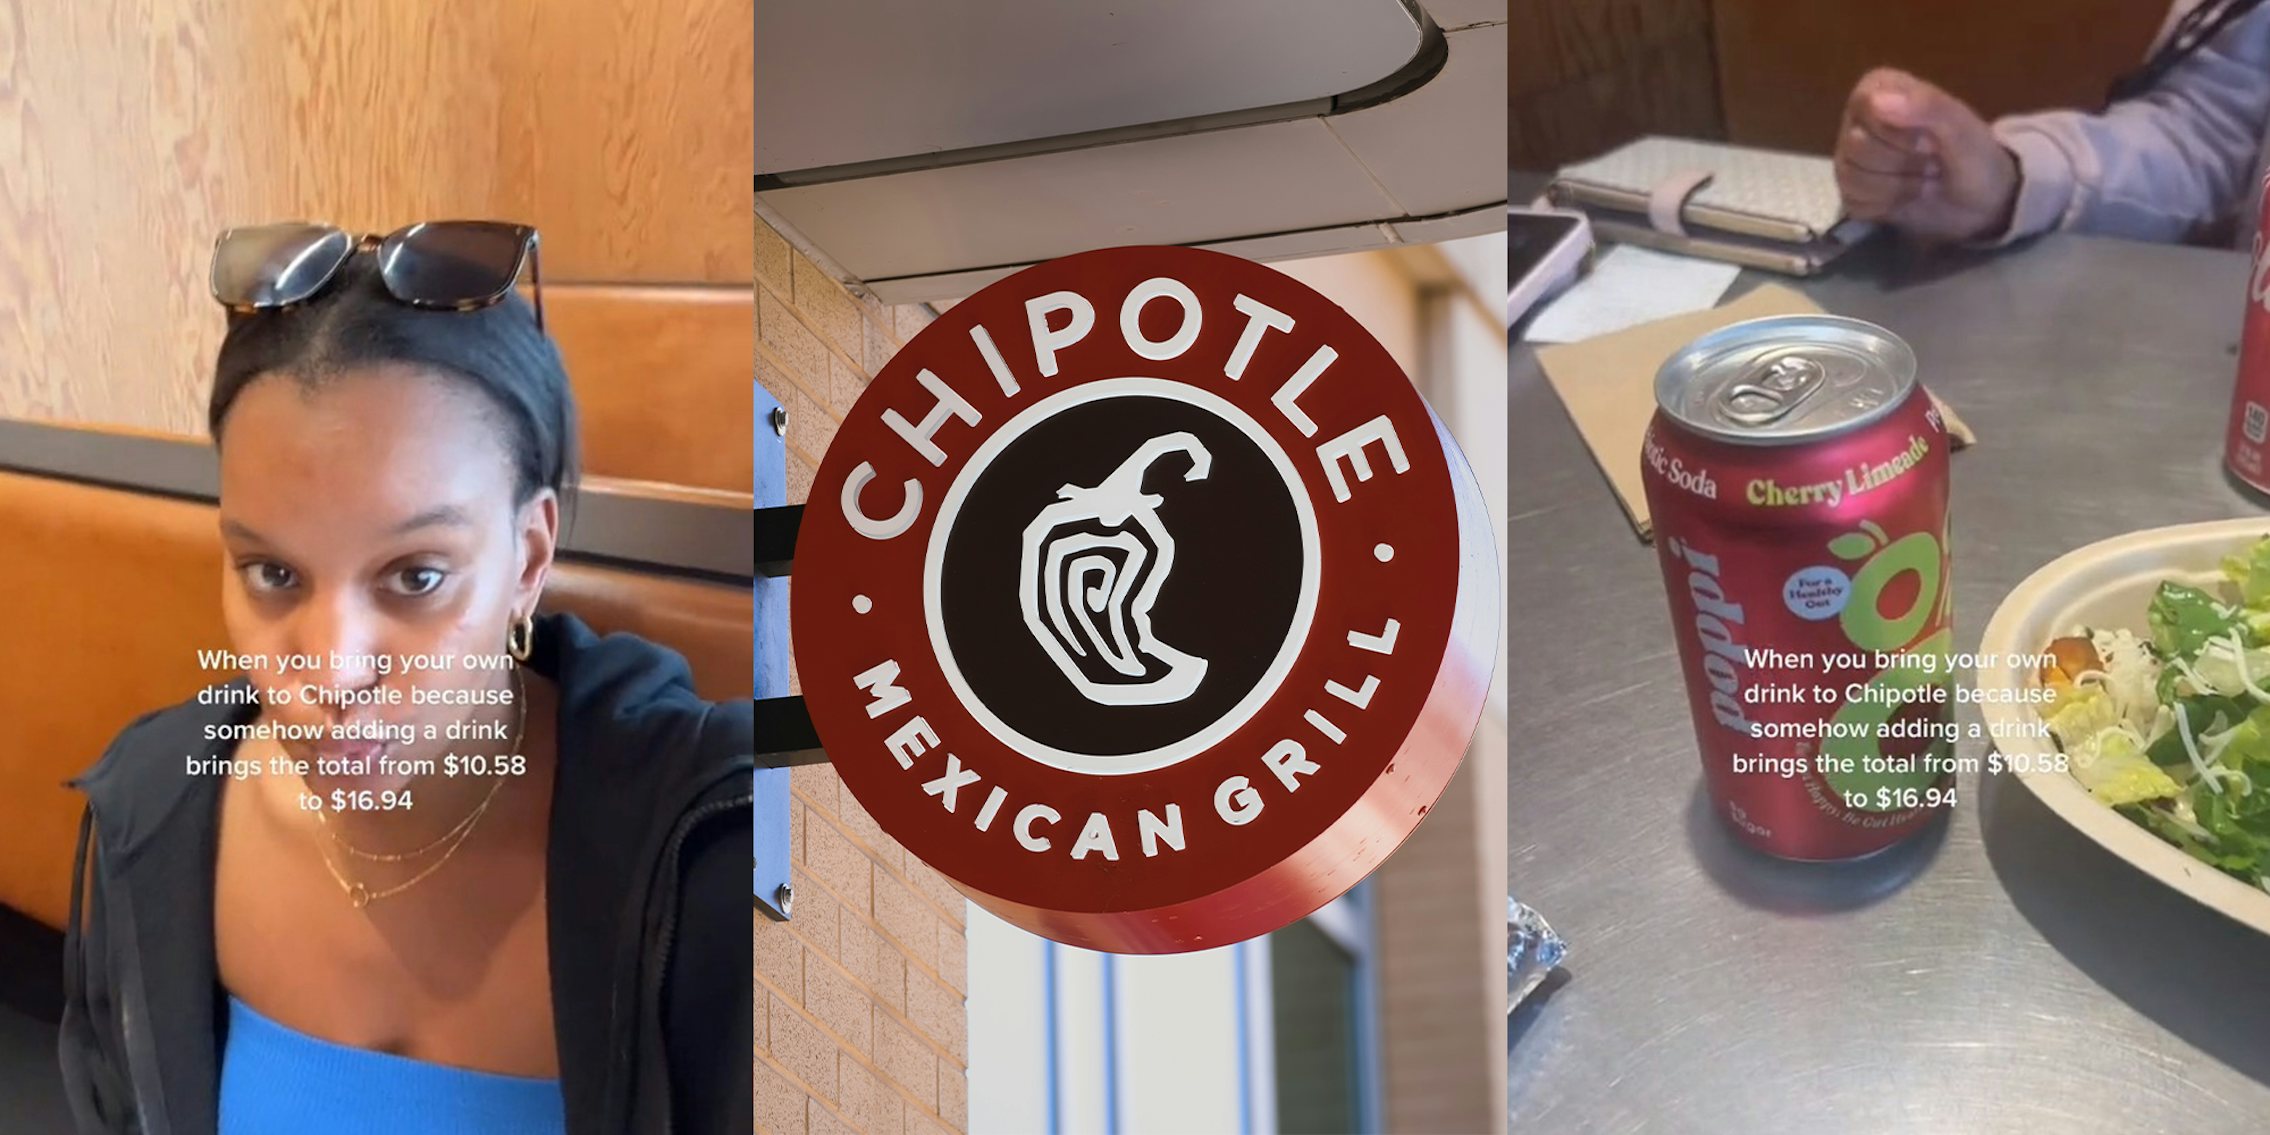 Customer brings own drink to Chipotle, claims it's cheaper